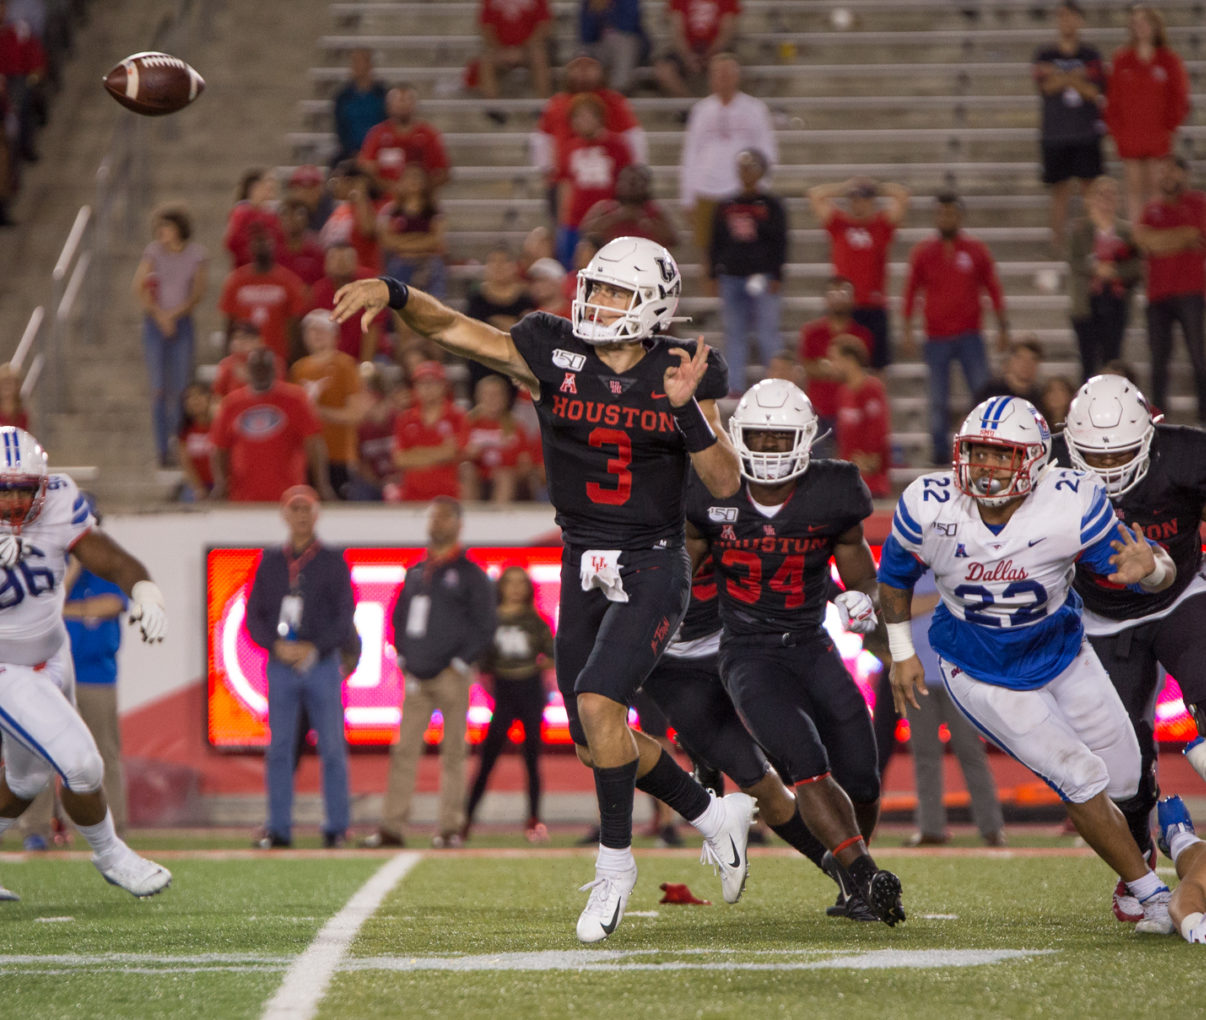 UH junior quarterback Clayton Tune airs out a pass against SMU during the 2019 season. | Trevor Nolley/The Cougar